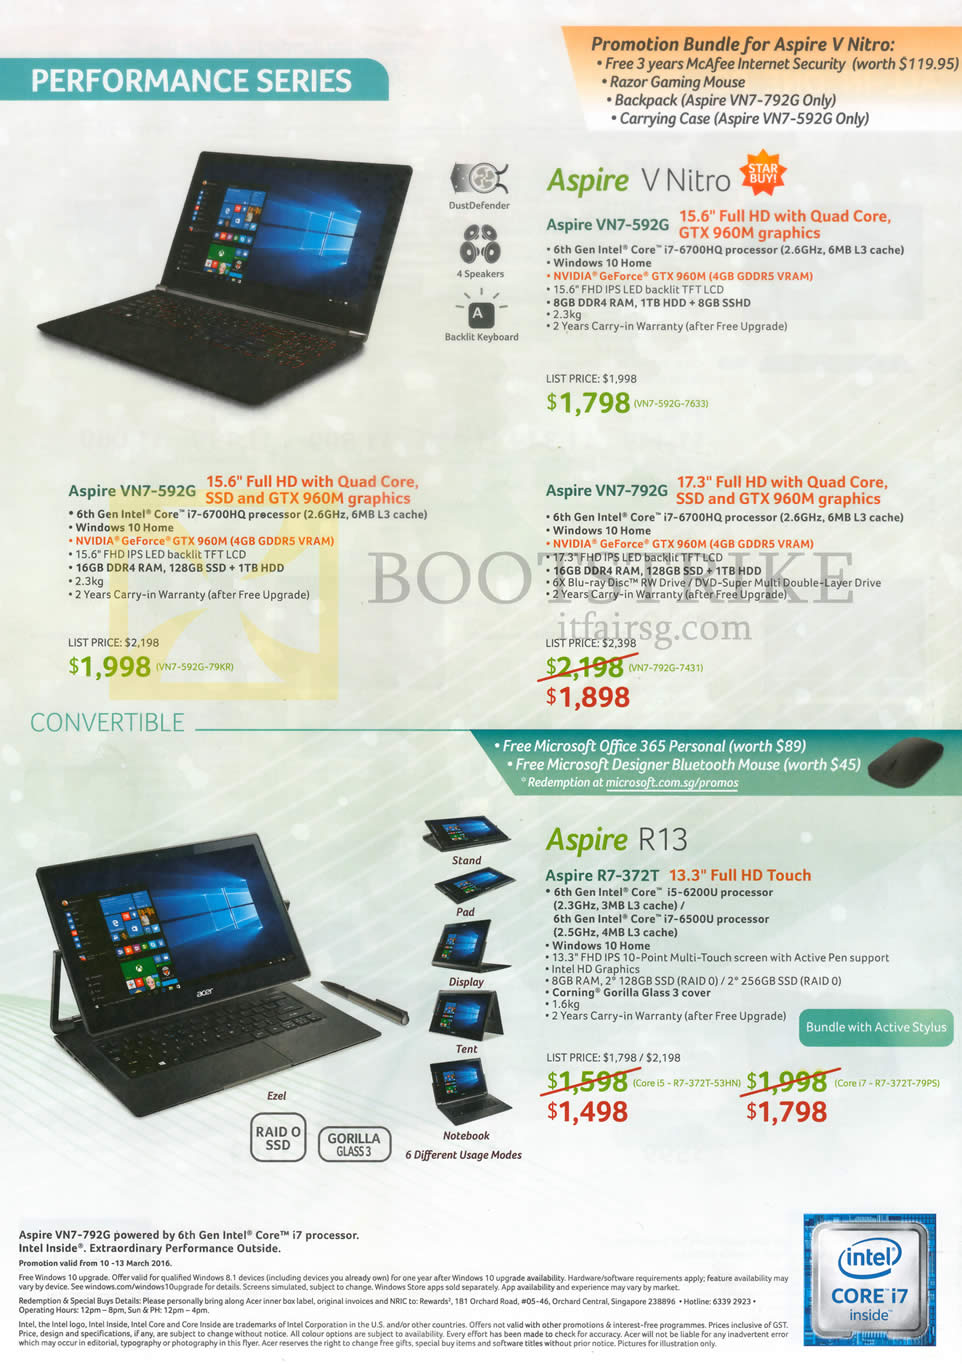 IT SHOW 2016 price list image brochure of Acer Notebooks Performance Series Aspire V Nitro, R13